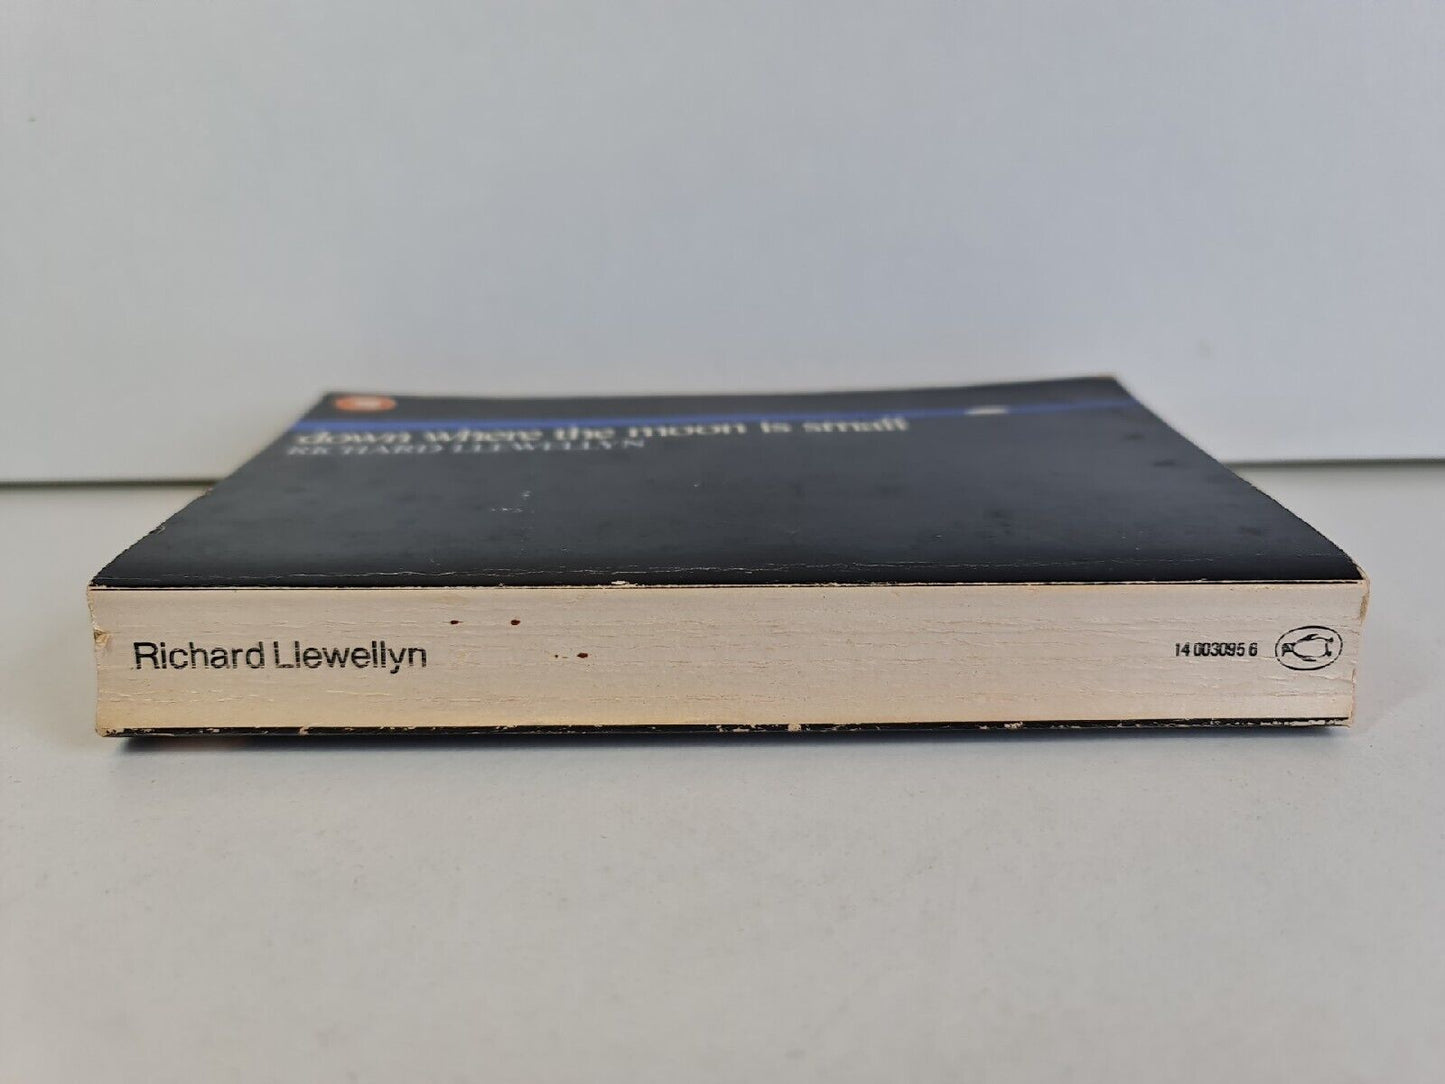 Down Where the Moon is Small by Richard Llewellyn (1970)